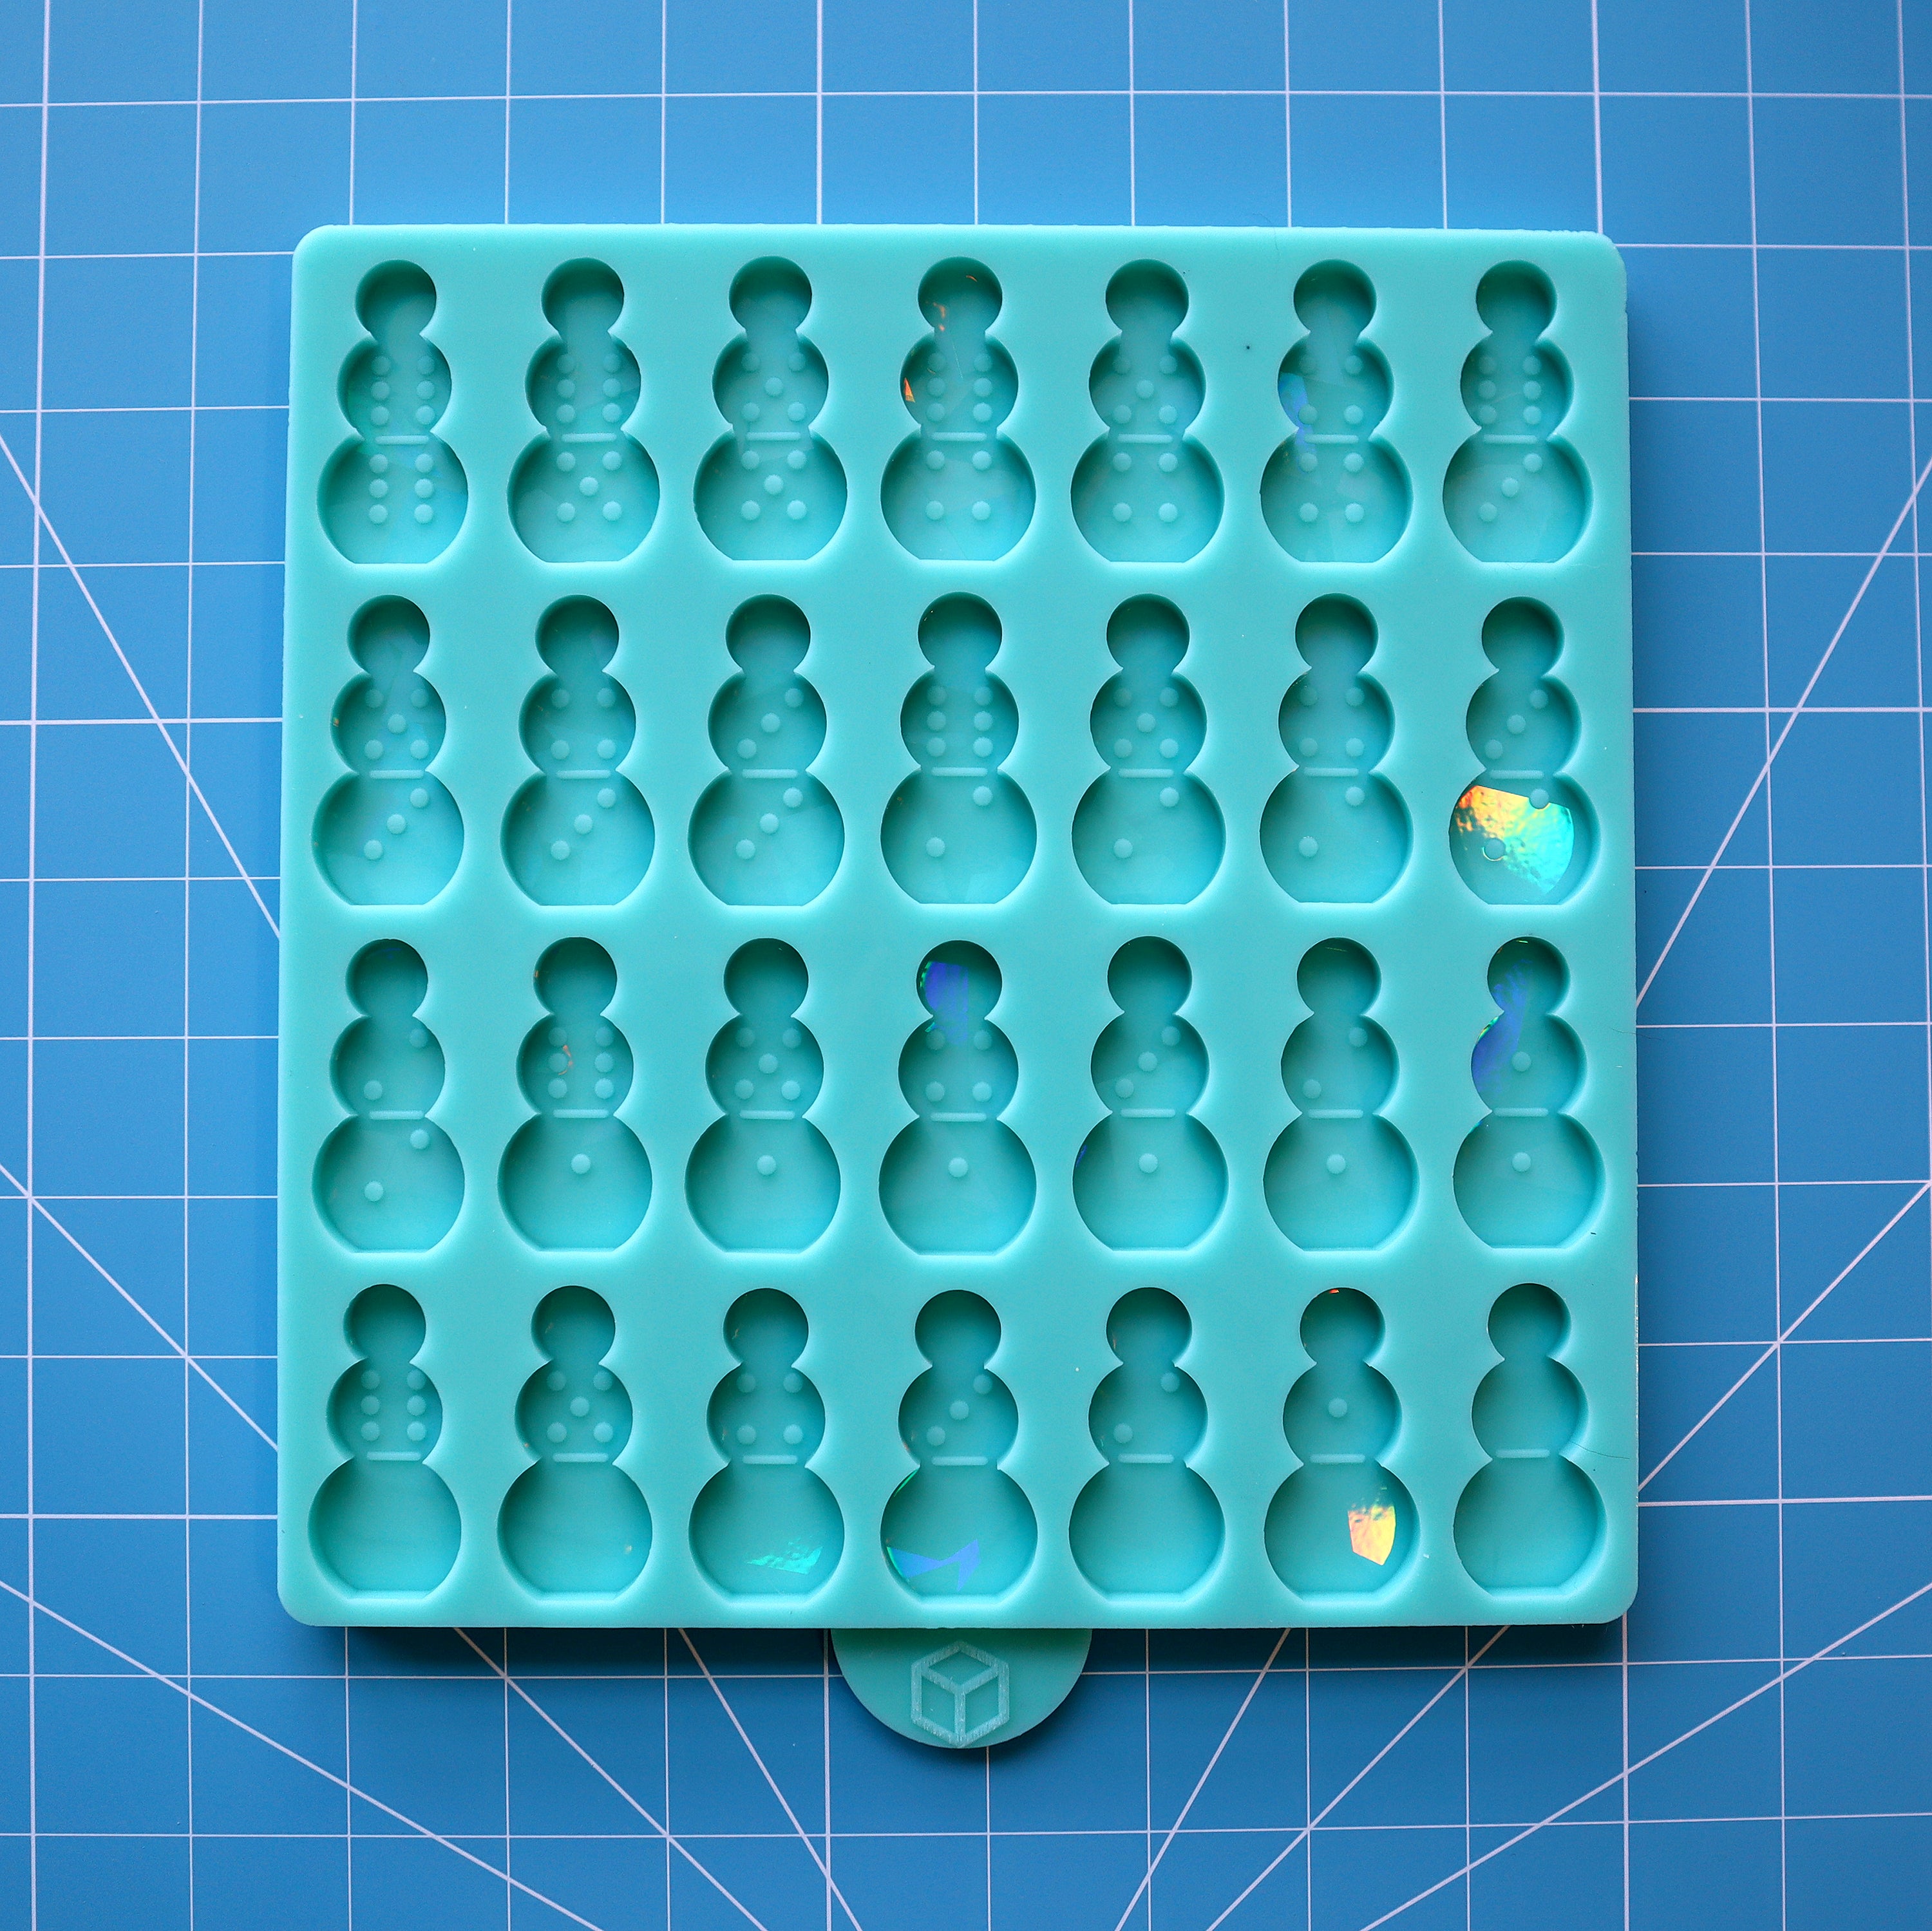 Holographic Snowman Dominoes Mold